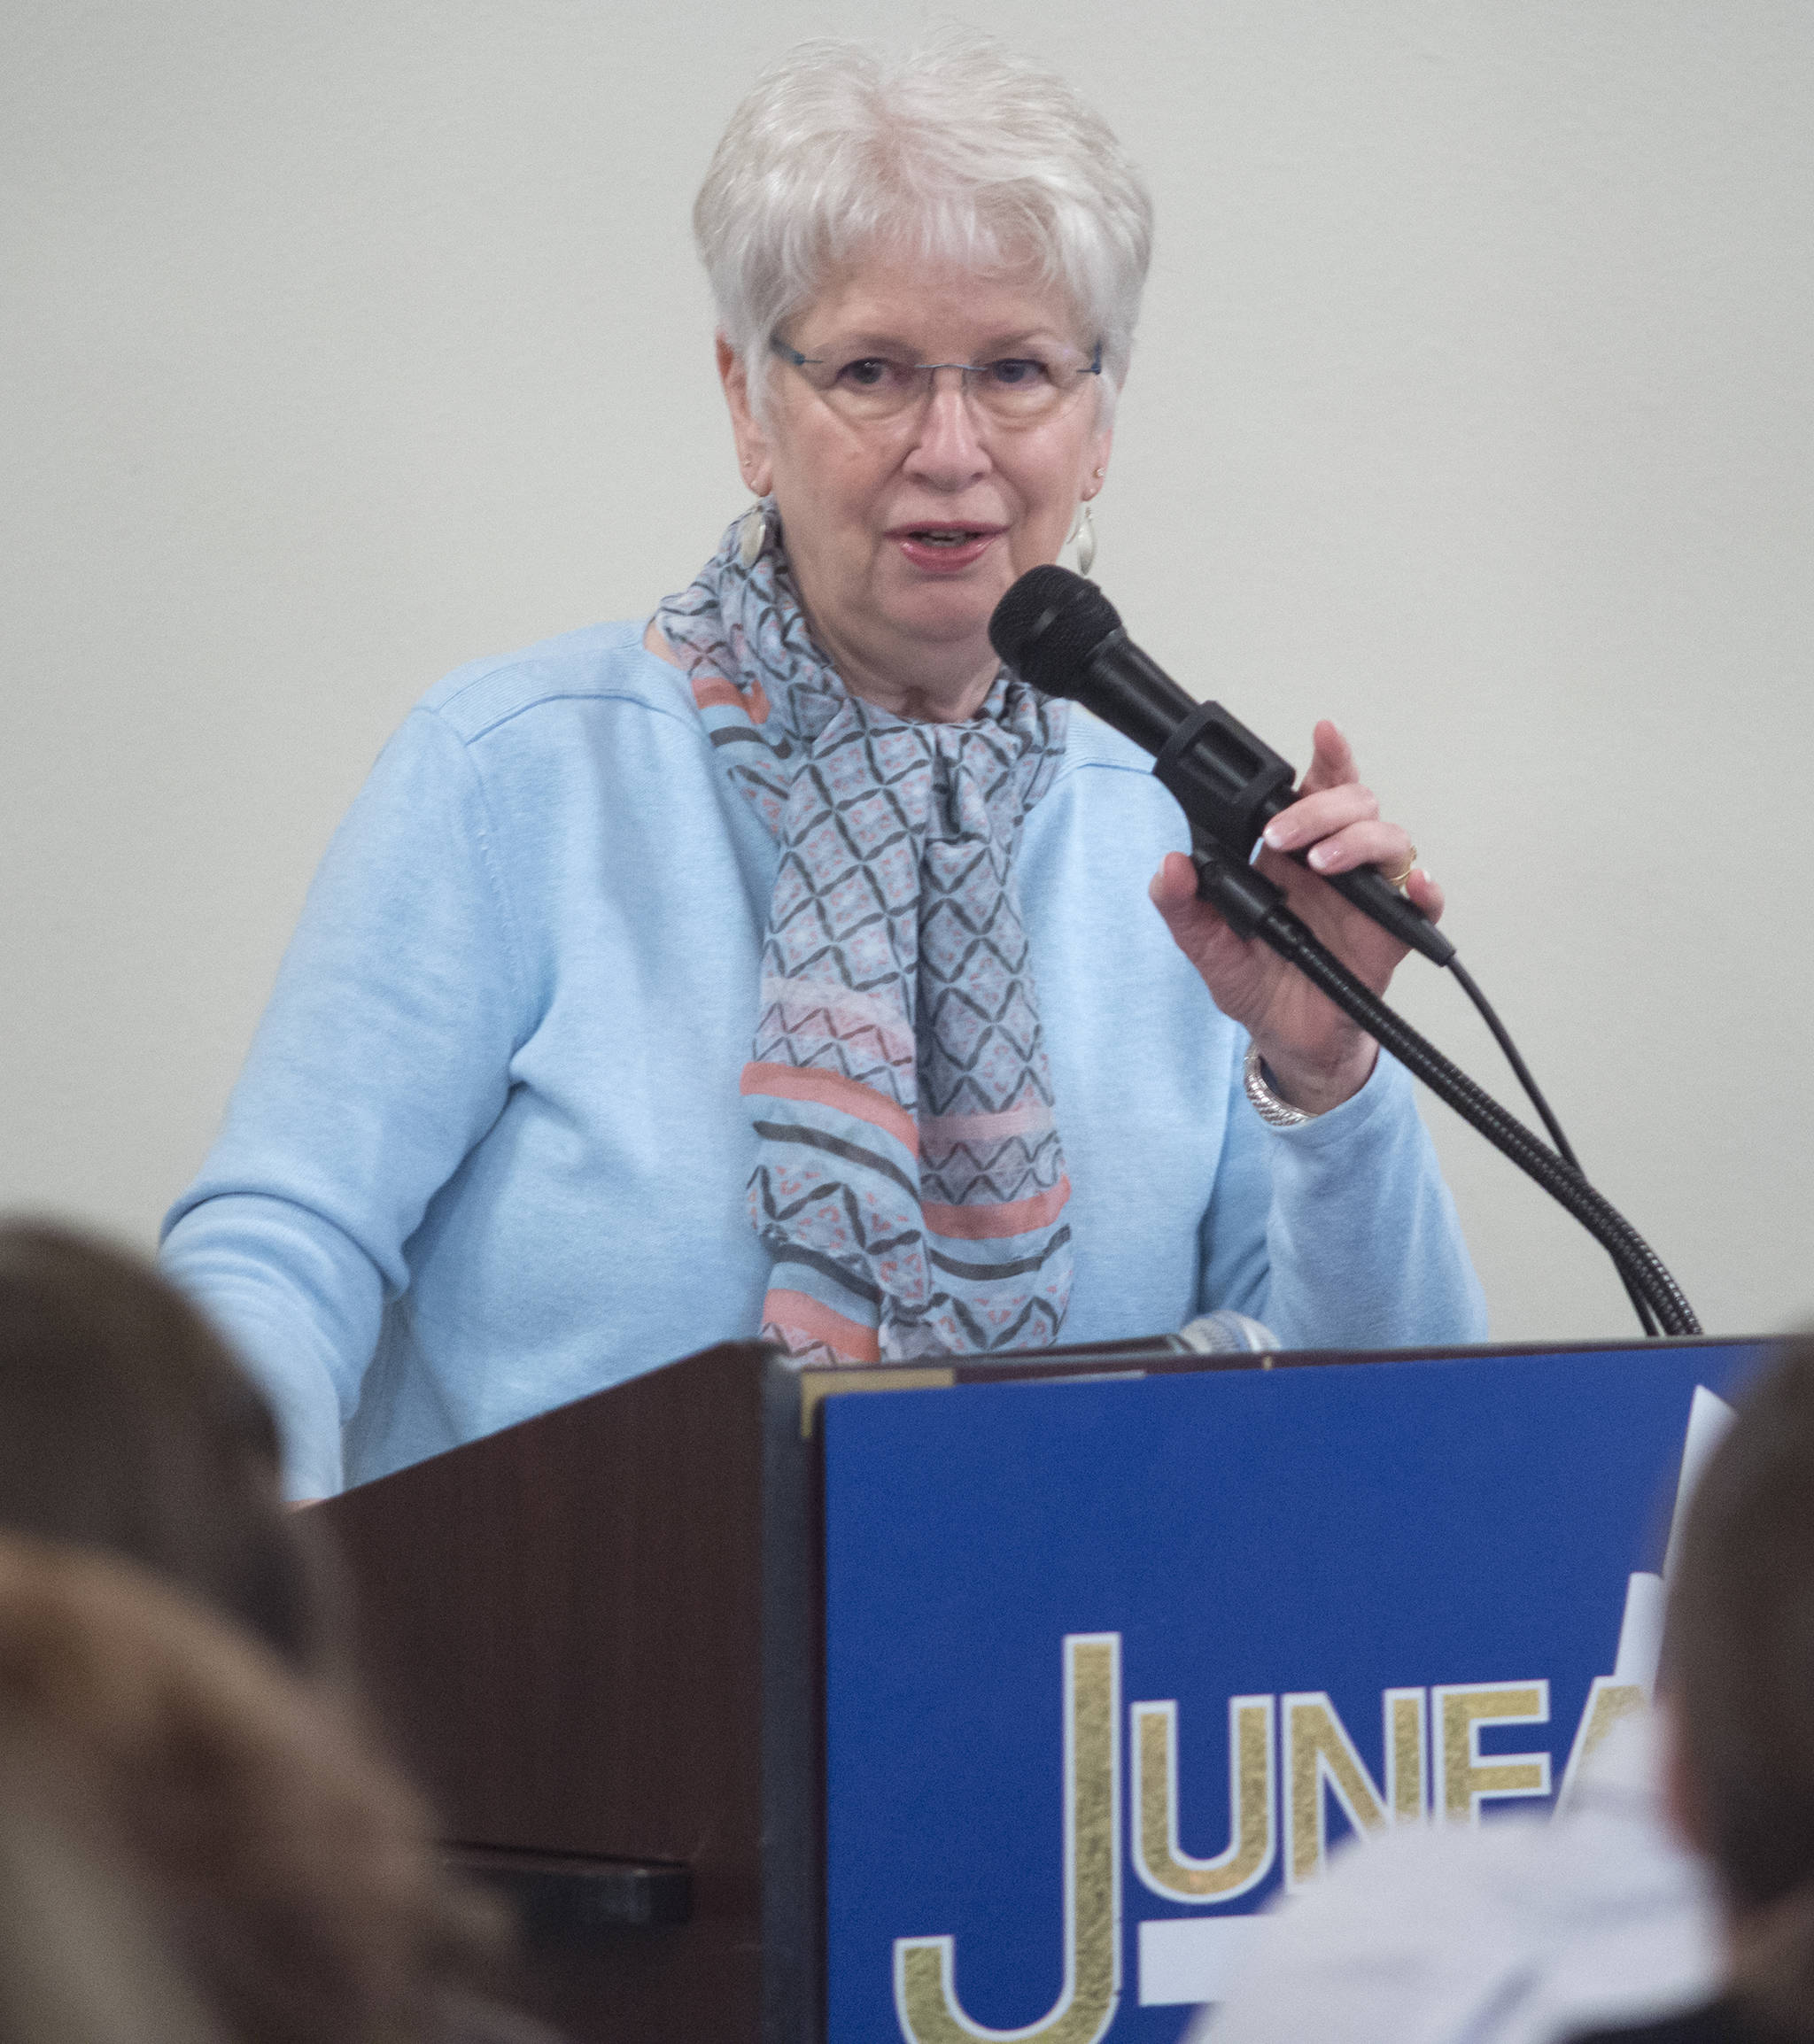 Sioux Douglas, President of Senior Citizen Support Services, Inc., gives a status update on “Riverview Senior Community” during the Juneau Chamber of Commerce luncheon at the Moose Lodge on Thursday, Aug. 24, 2017. (Michael Penn | Juneau Empire)